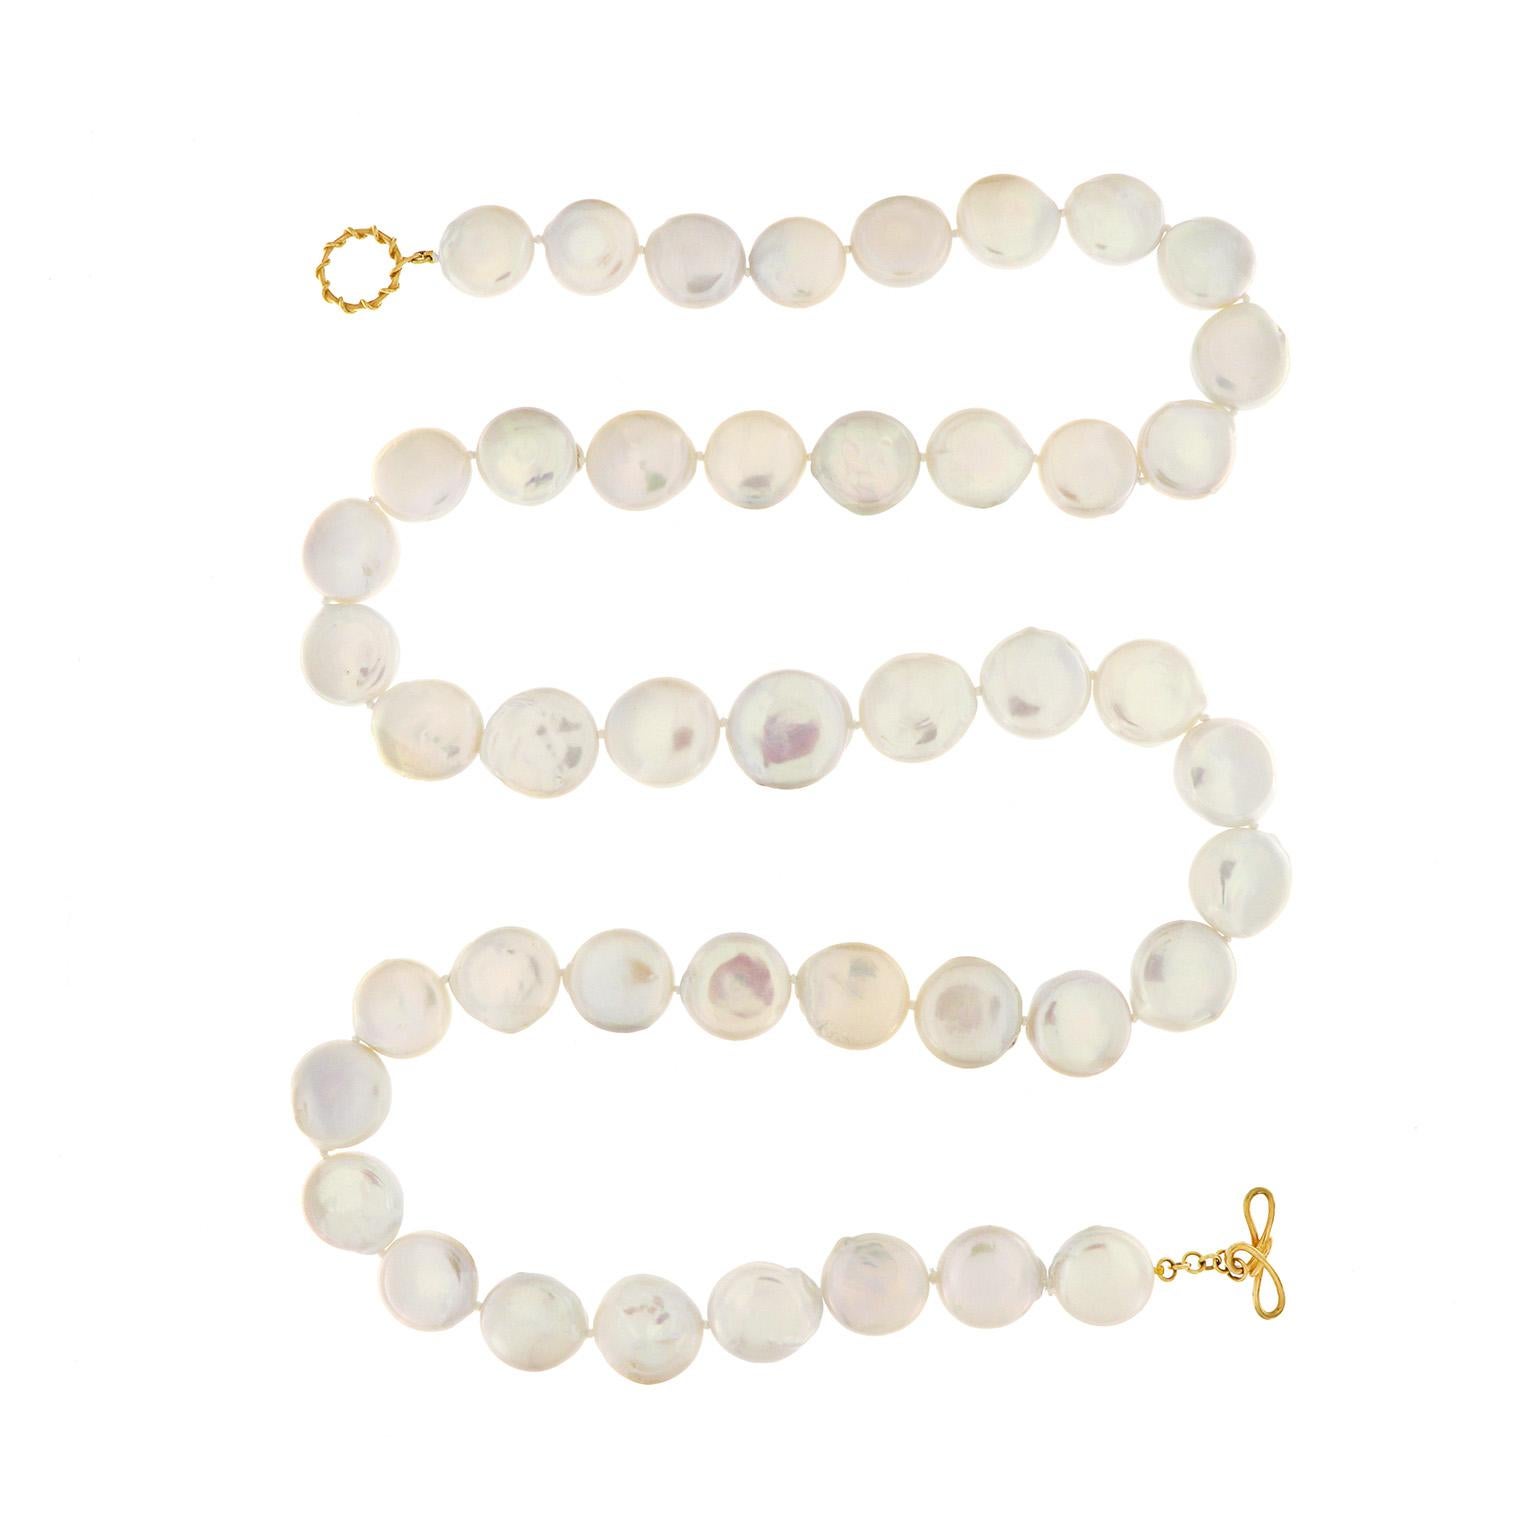 Soft iris hues demonstrate the beauty found from the freshwater pearls in this necklace. Carved into coins, the pearls reflect delicate colors as the light falls upon them. The total weight of the 20mm round pearls is 45 carats. An 18k yellow gold